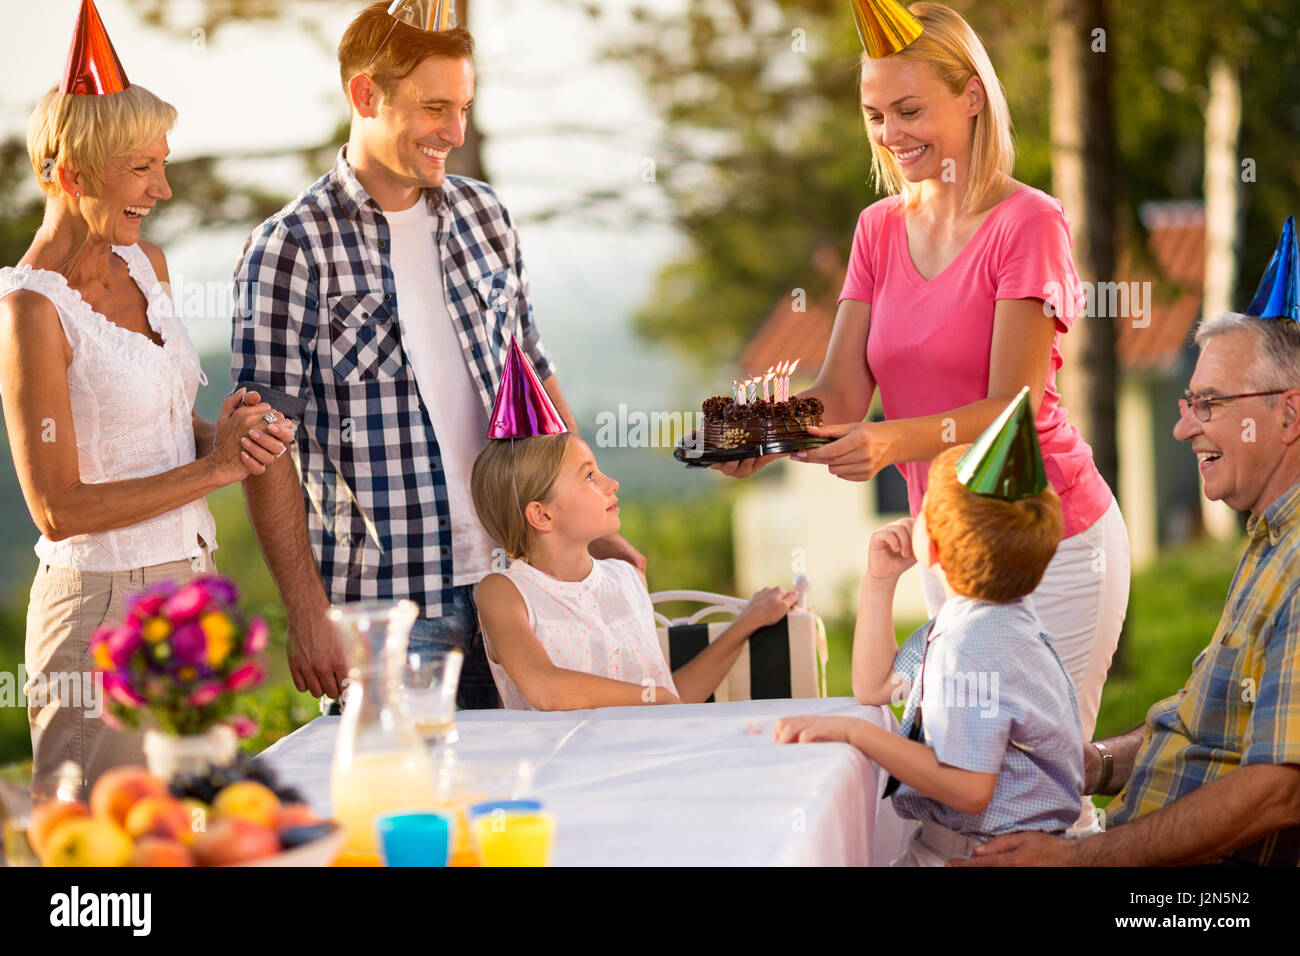 birthday cake for girl and  happy family Stock Photo